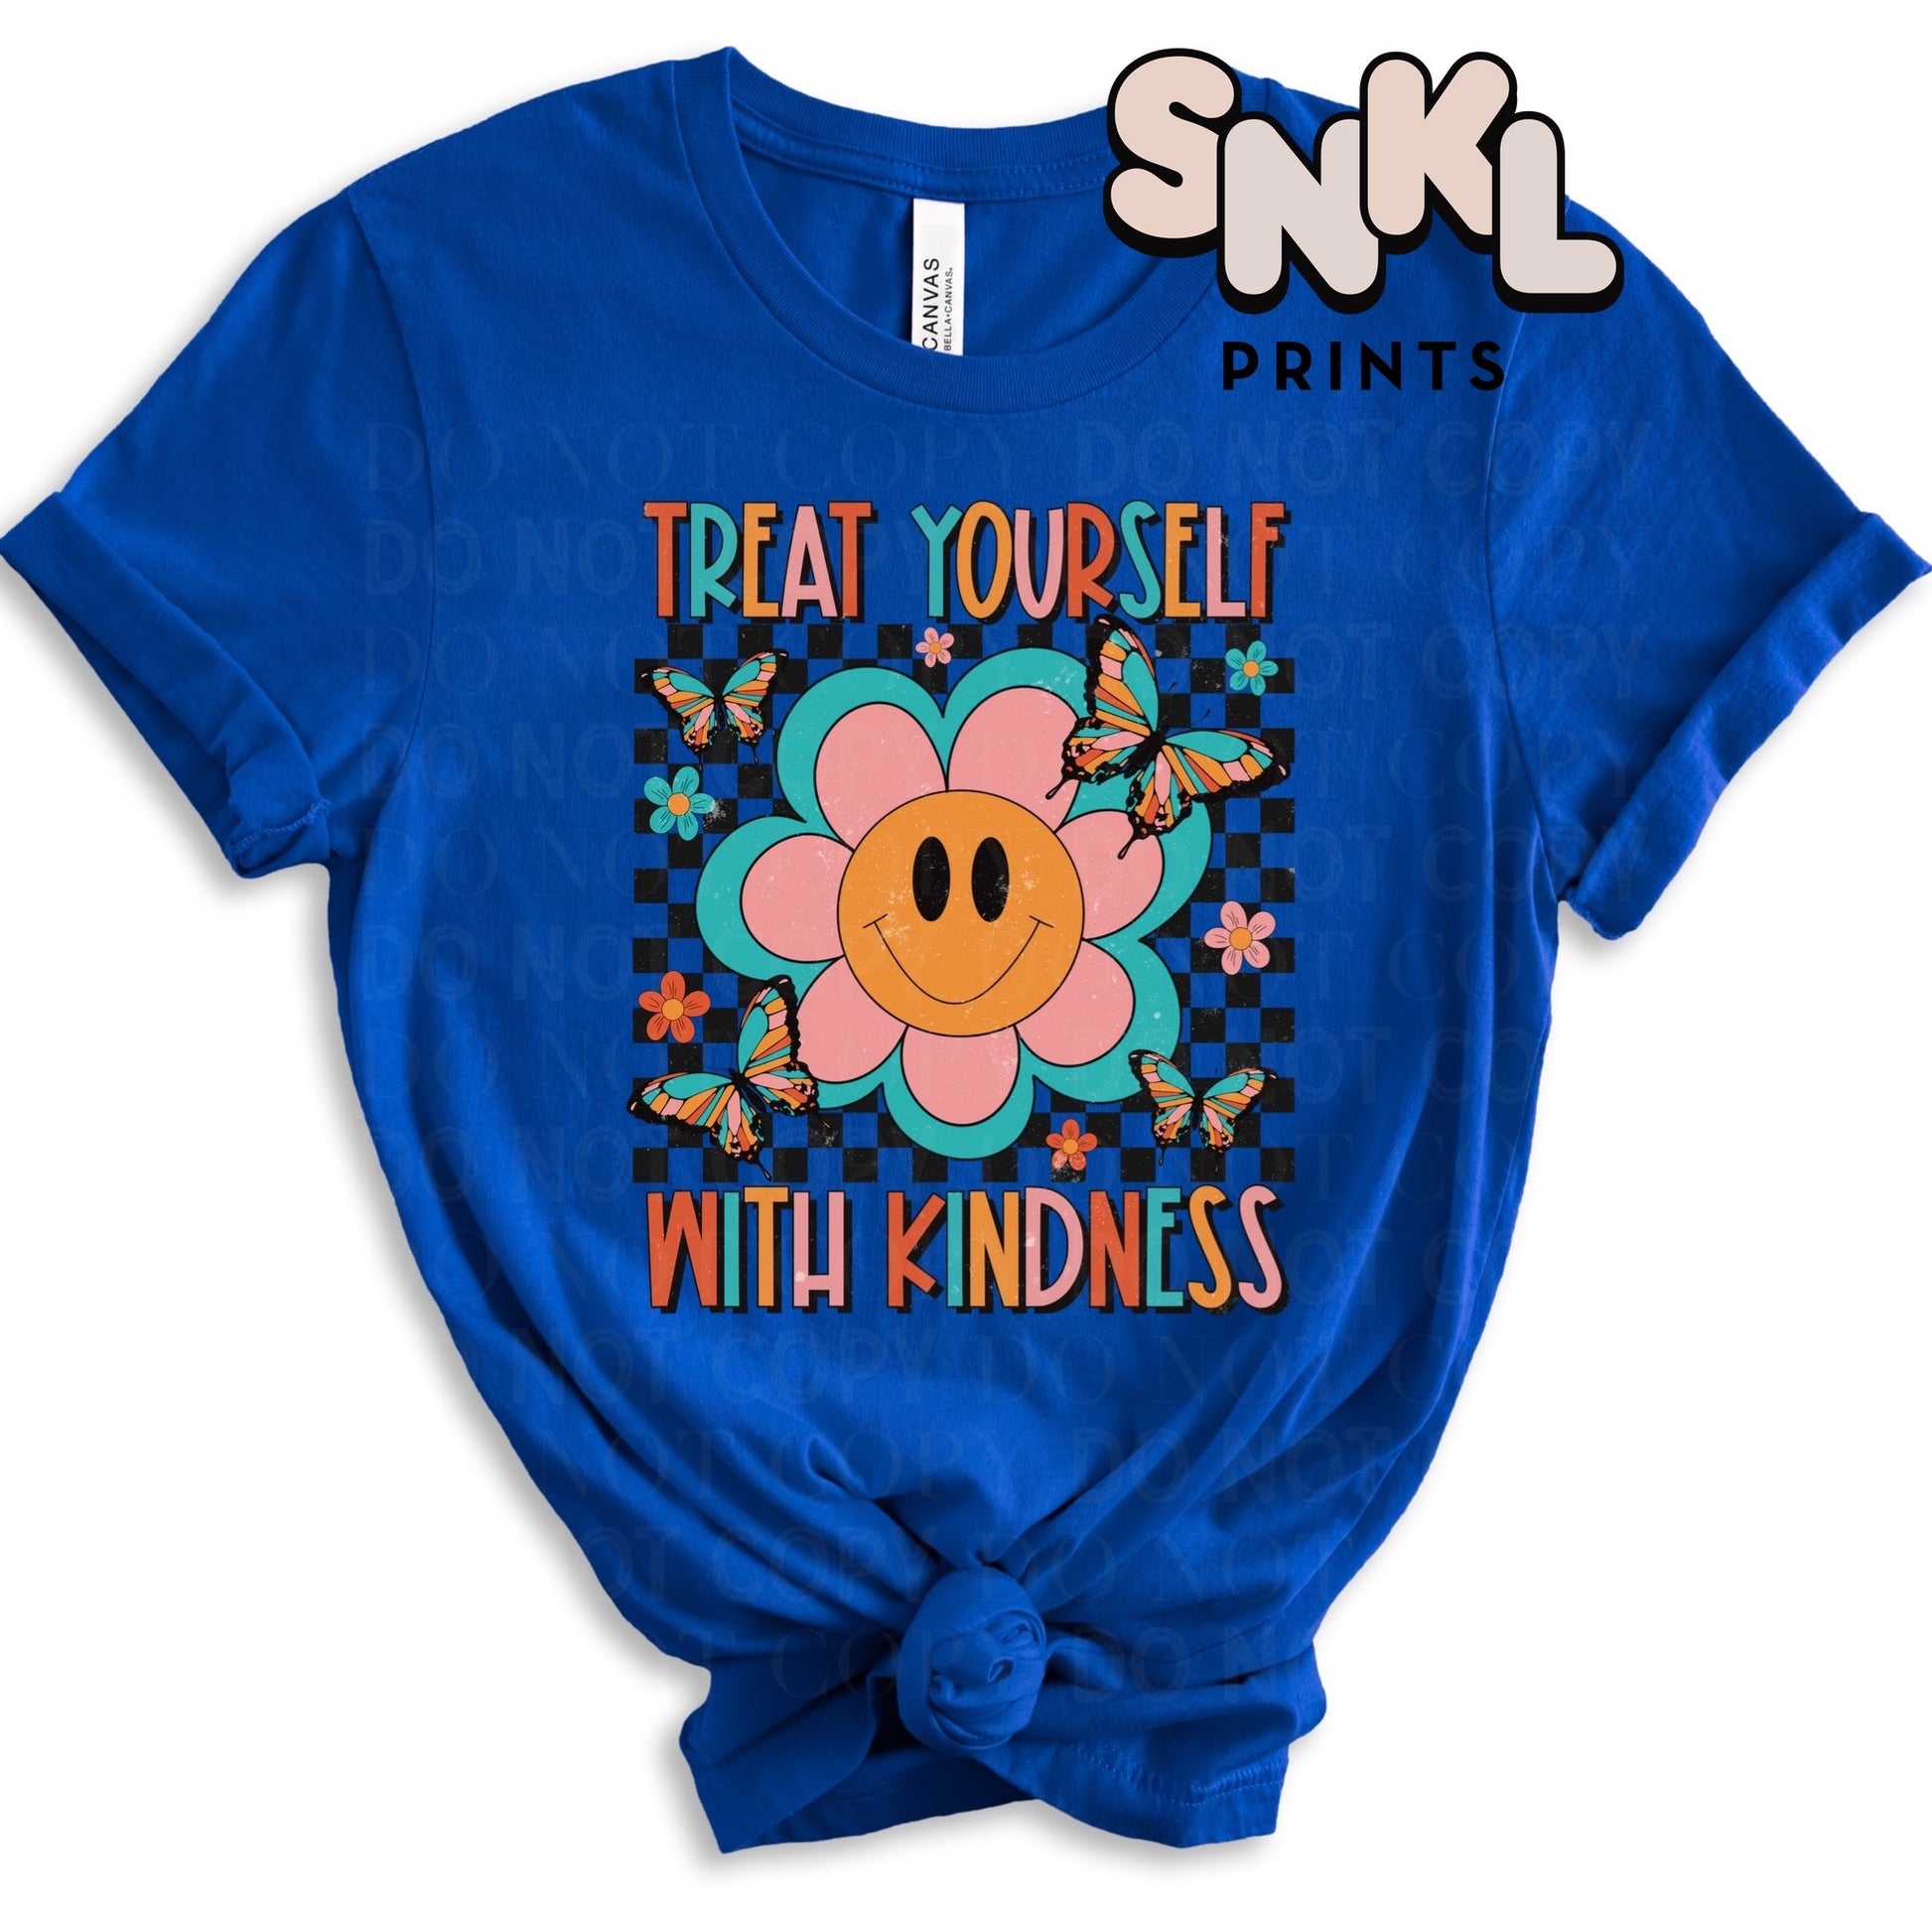 Treat Yourself With Kindess | Adult - SNKL Prints